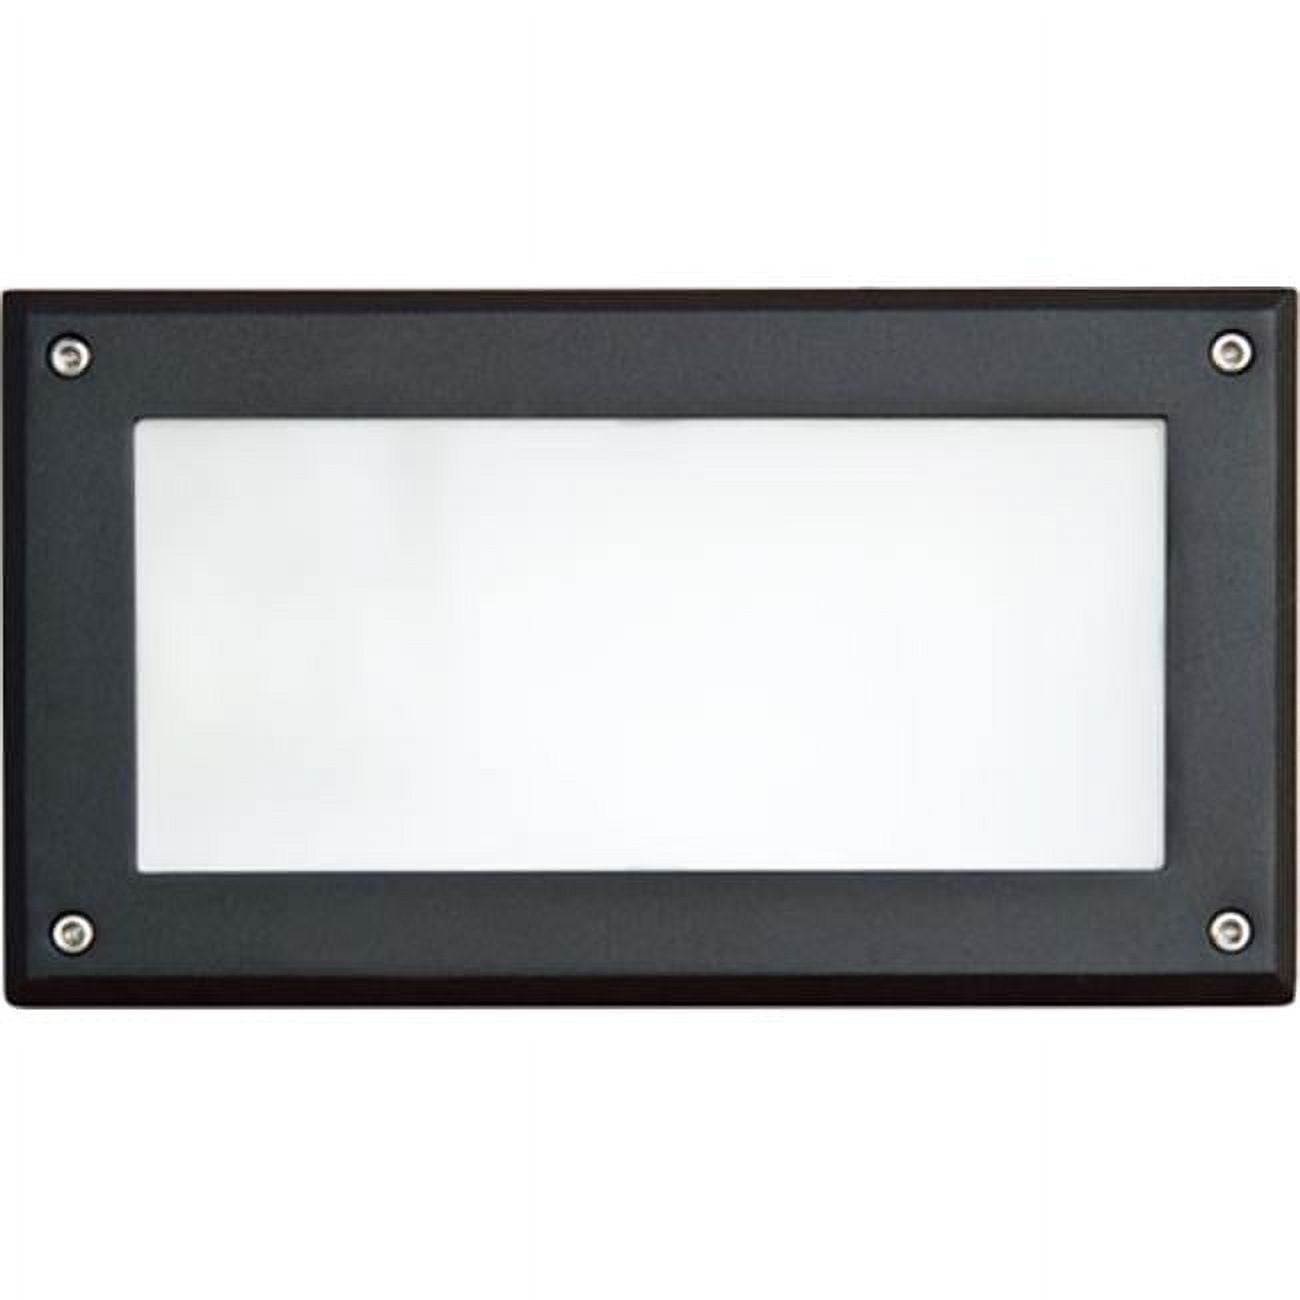 Recessed Open Face Brick, Step & Wall Light - 5w 120, Black